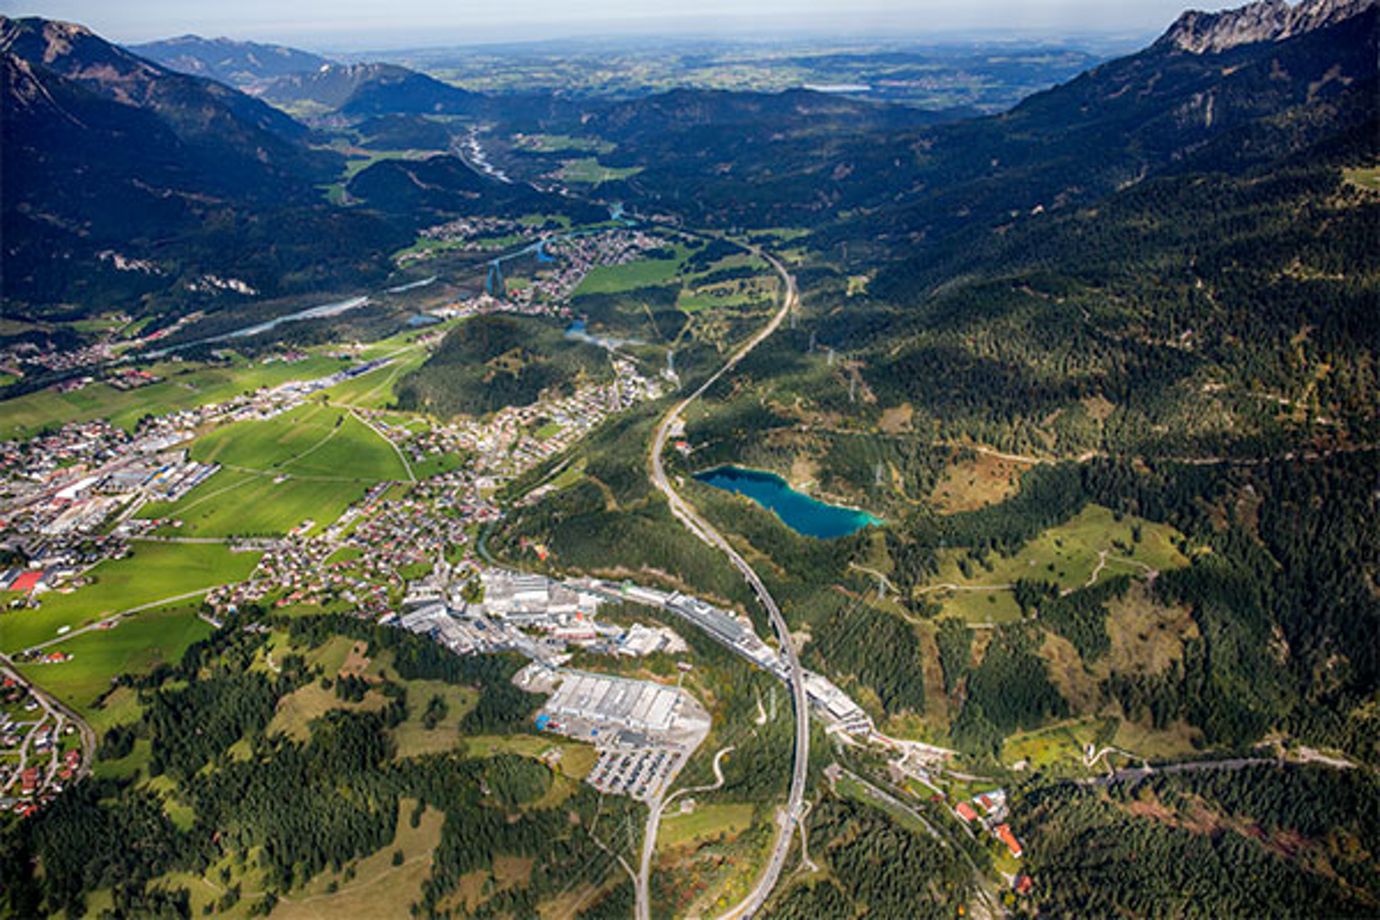 Plansee aerial photo of Reutte